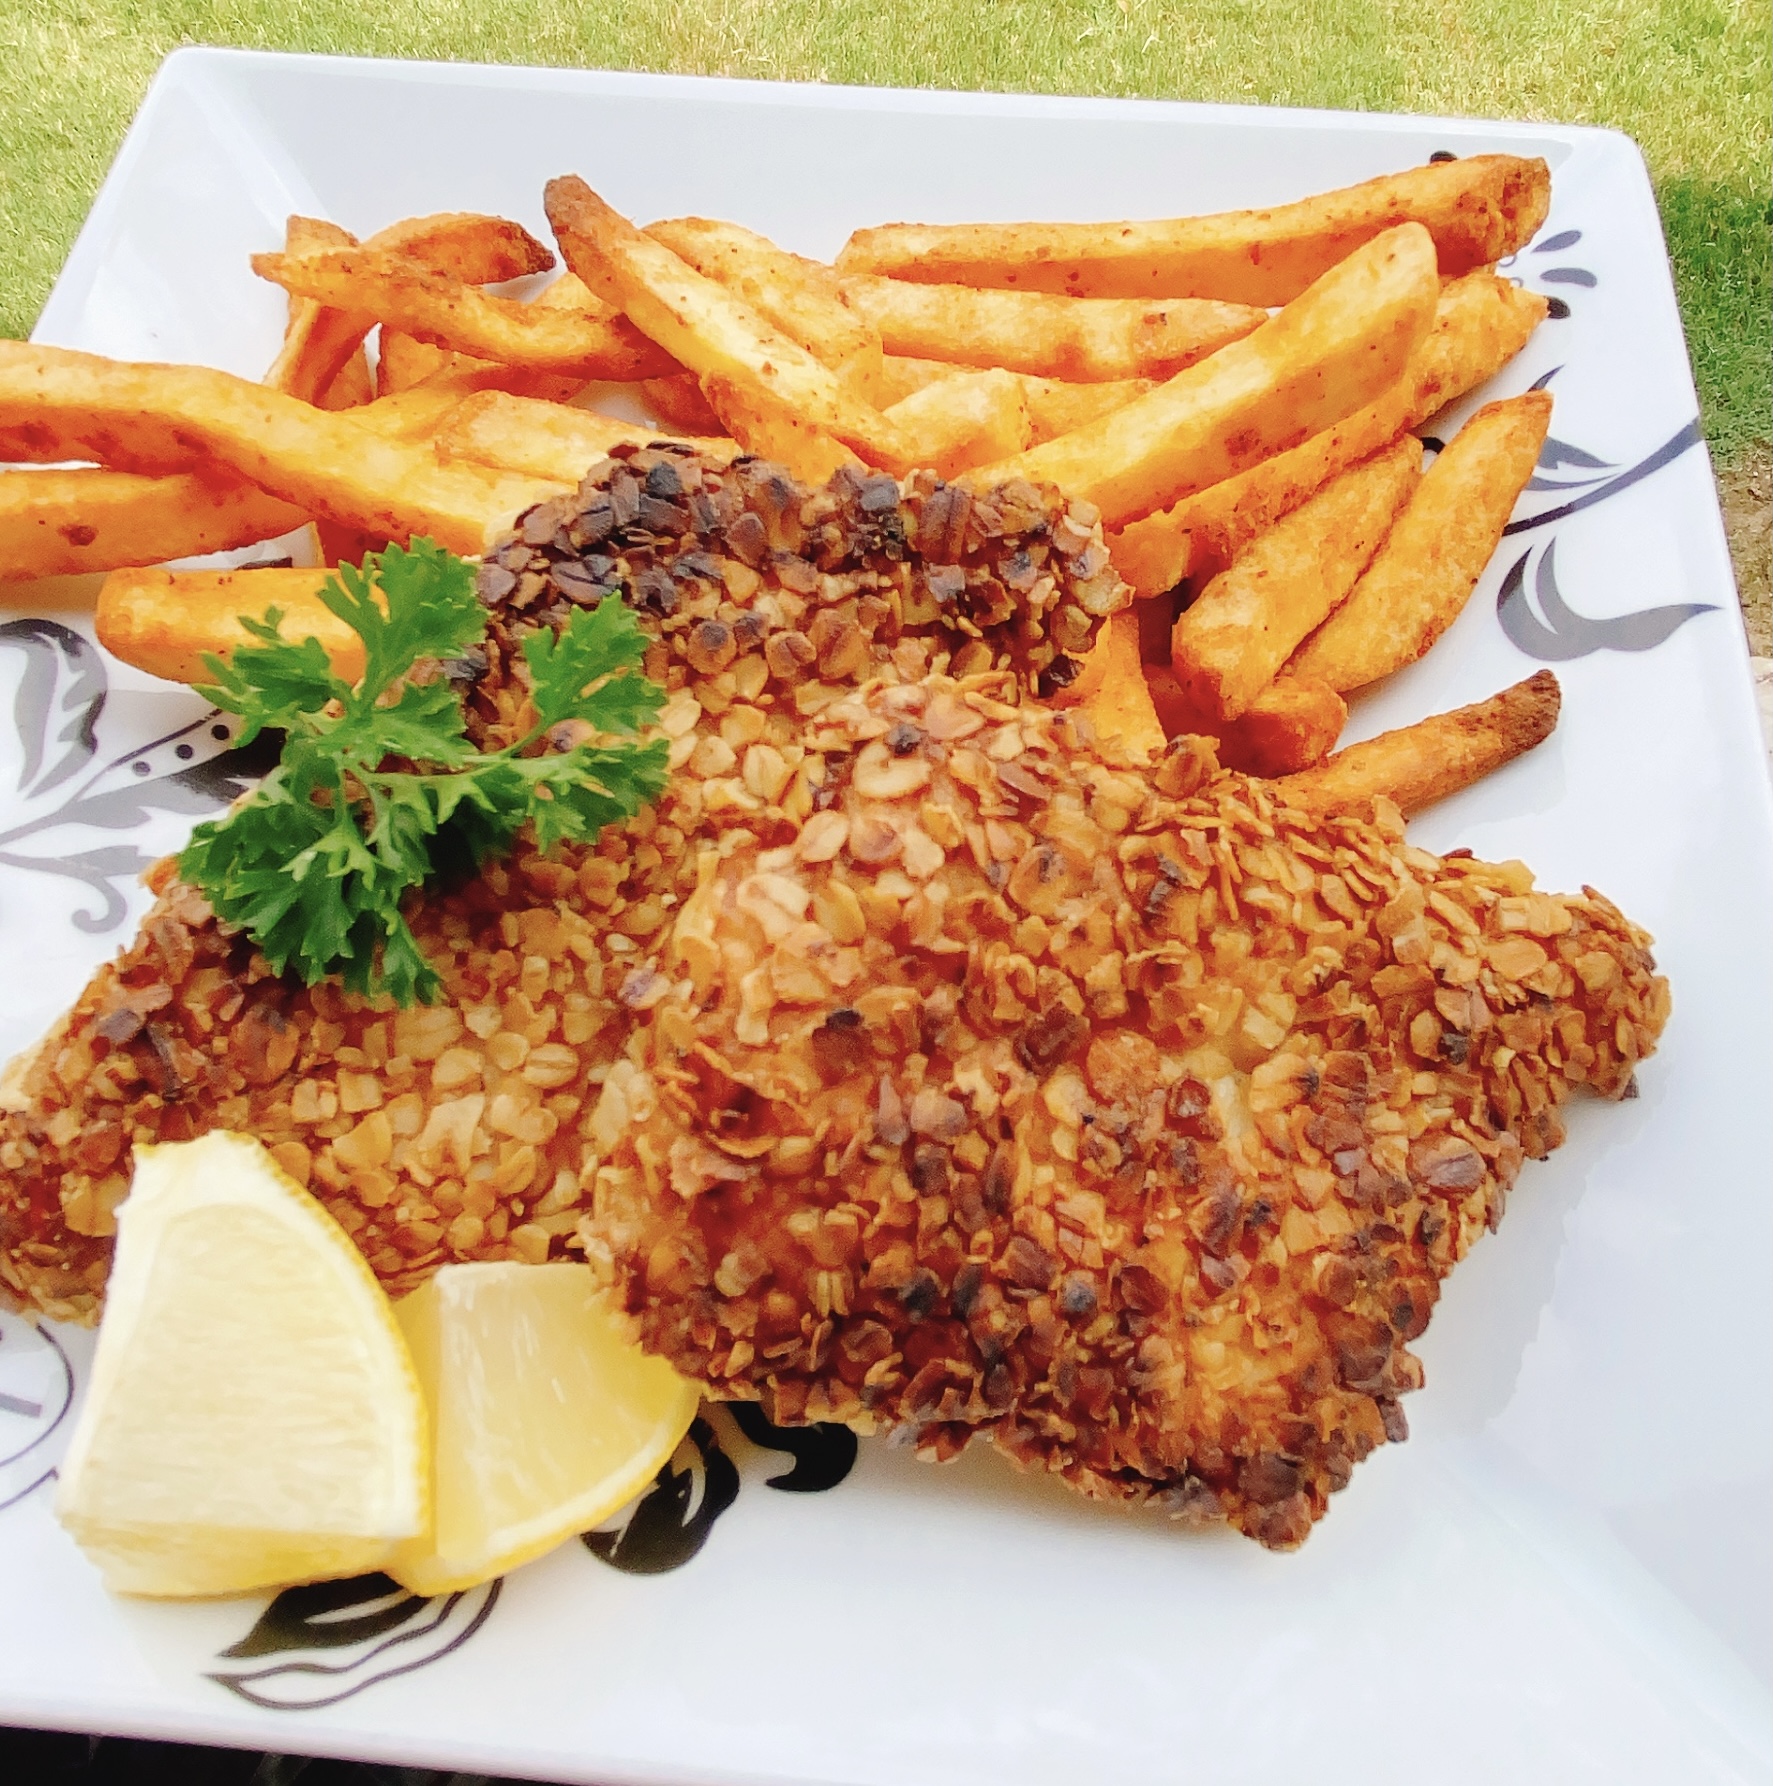 Oat Crusted Fish thedailygourmet